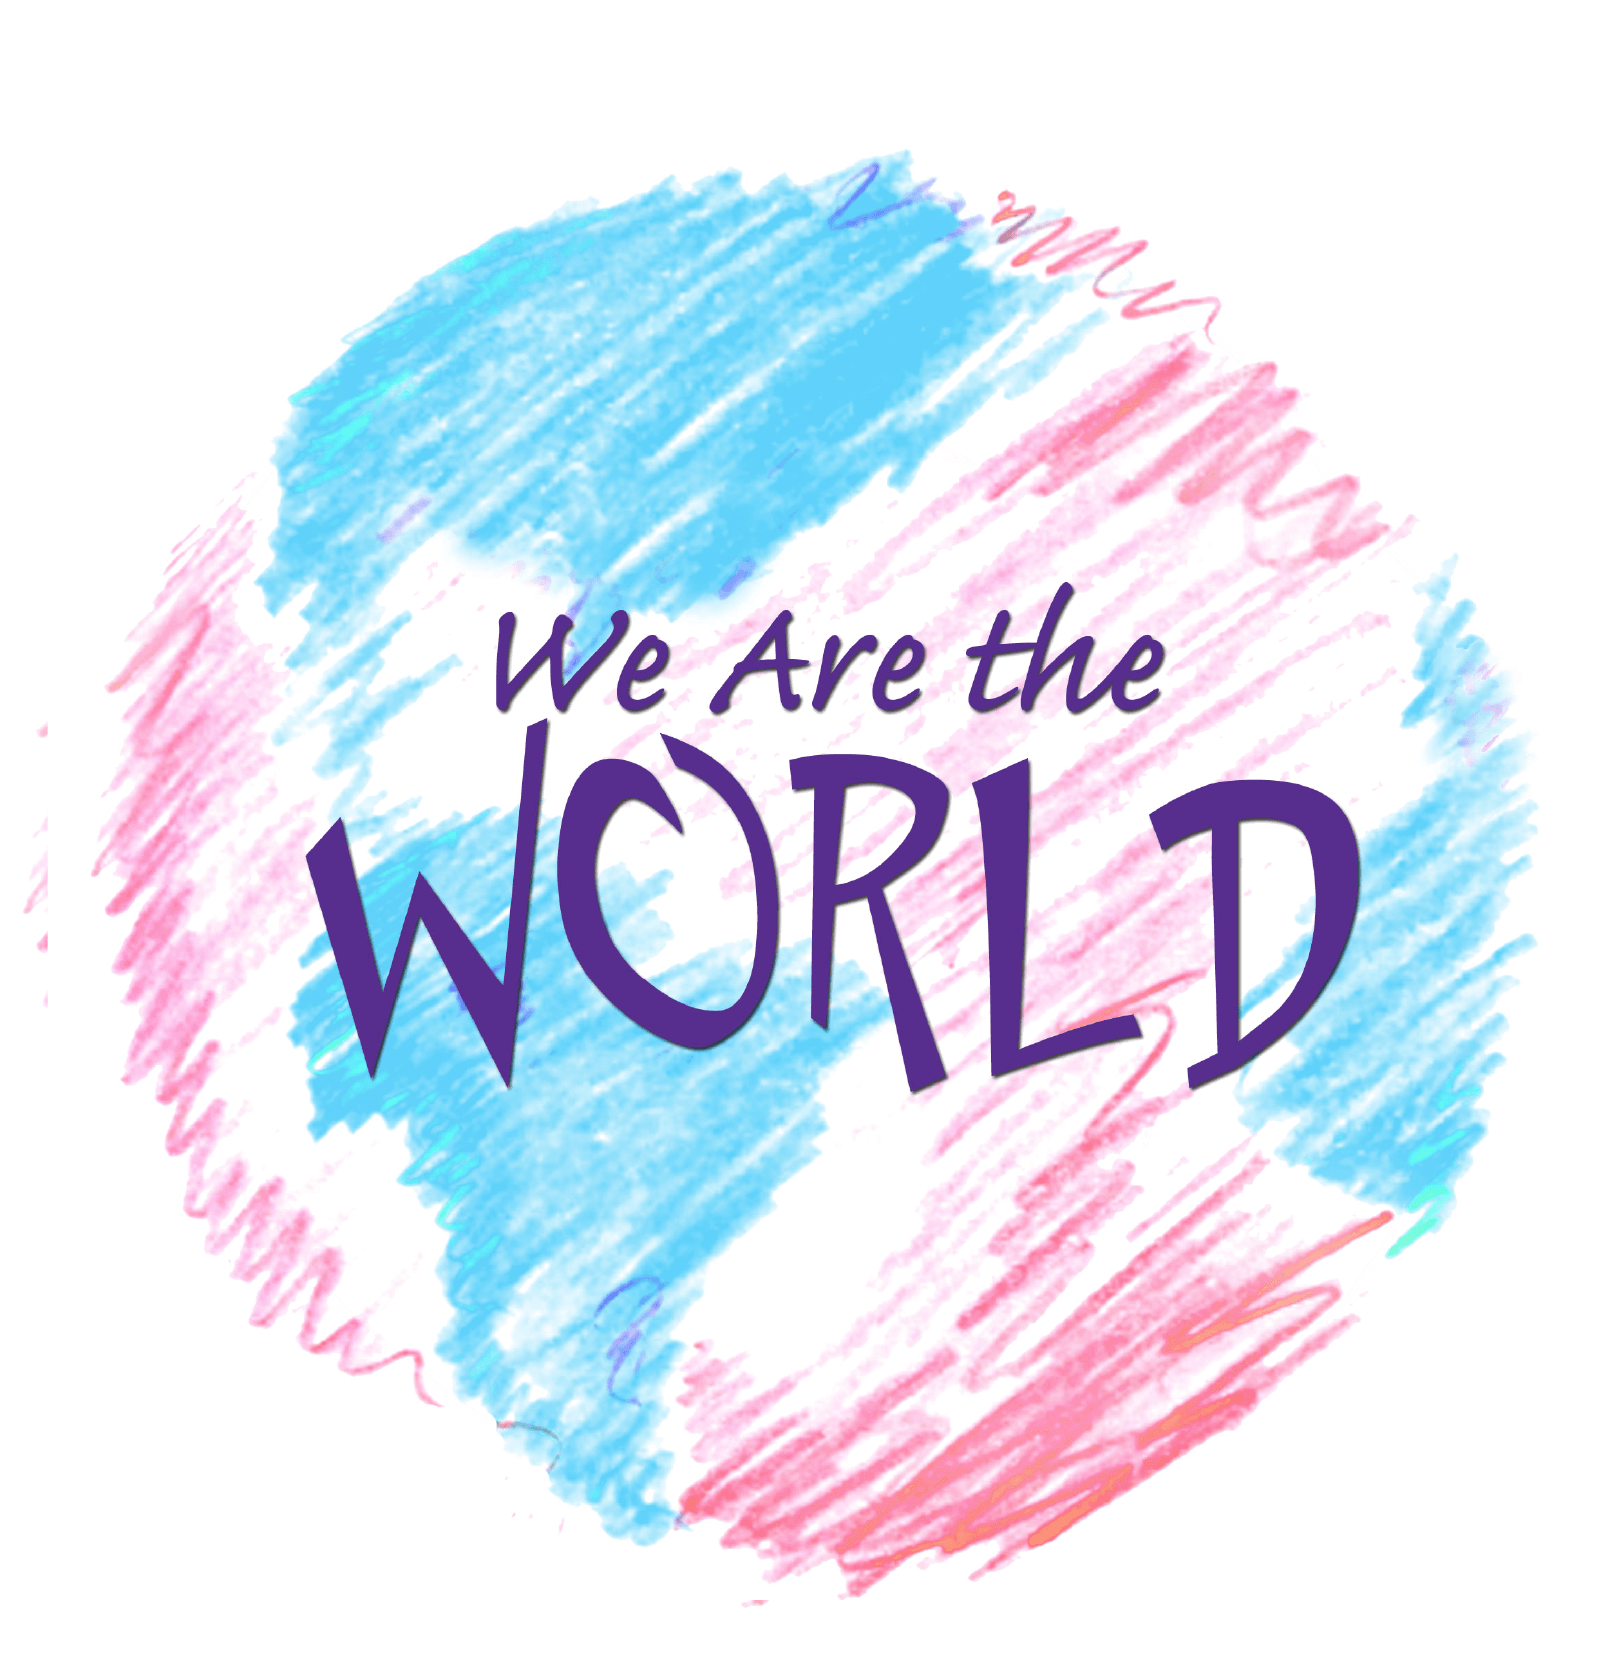 We Are the World Logo - We Are The World | St. Mary's School (I.C.S.E.)